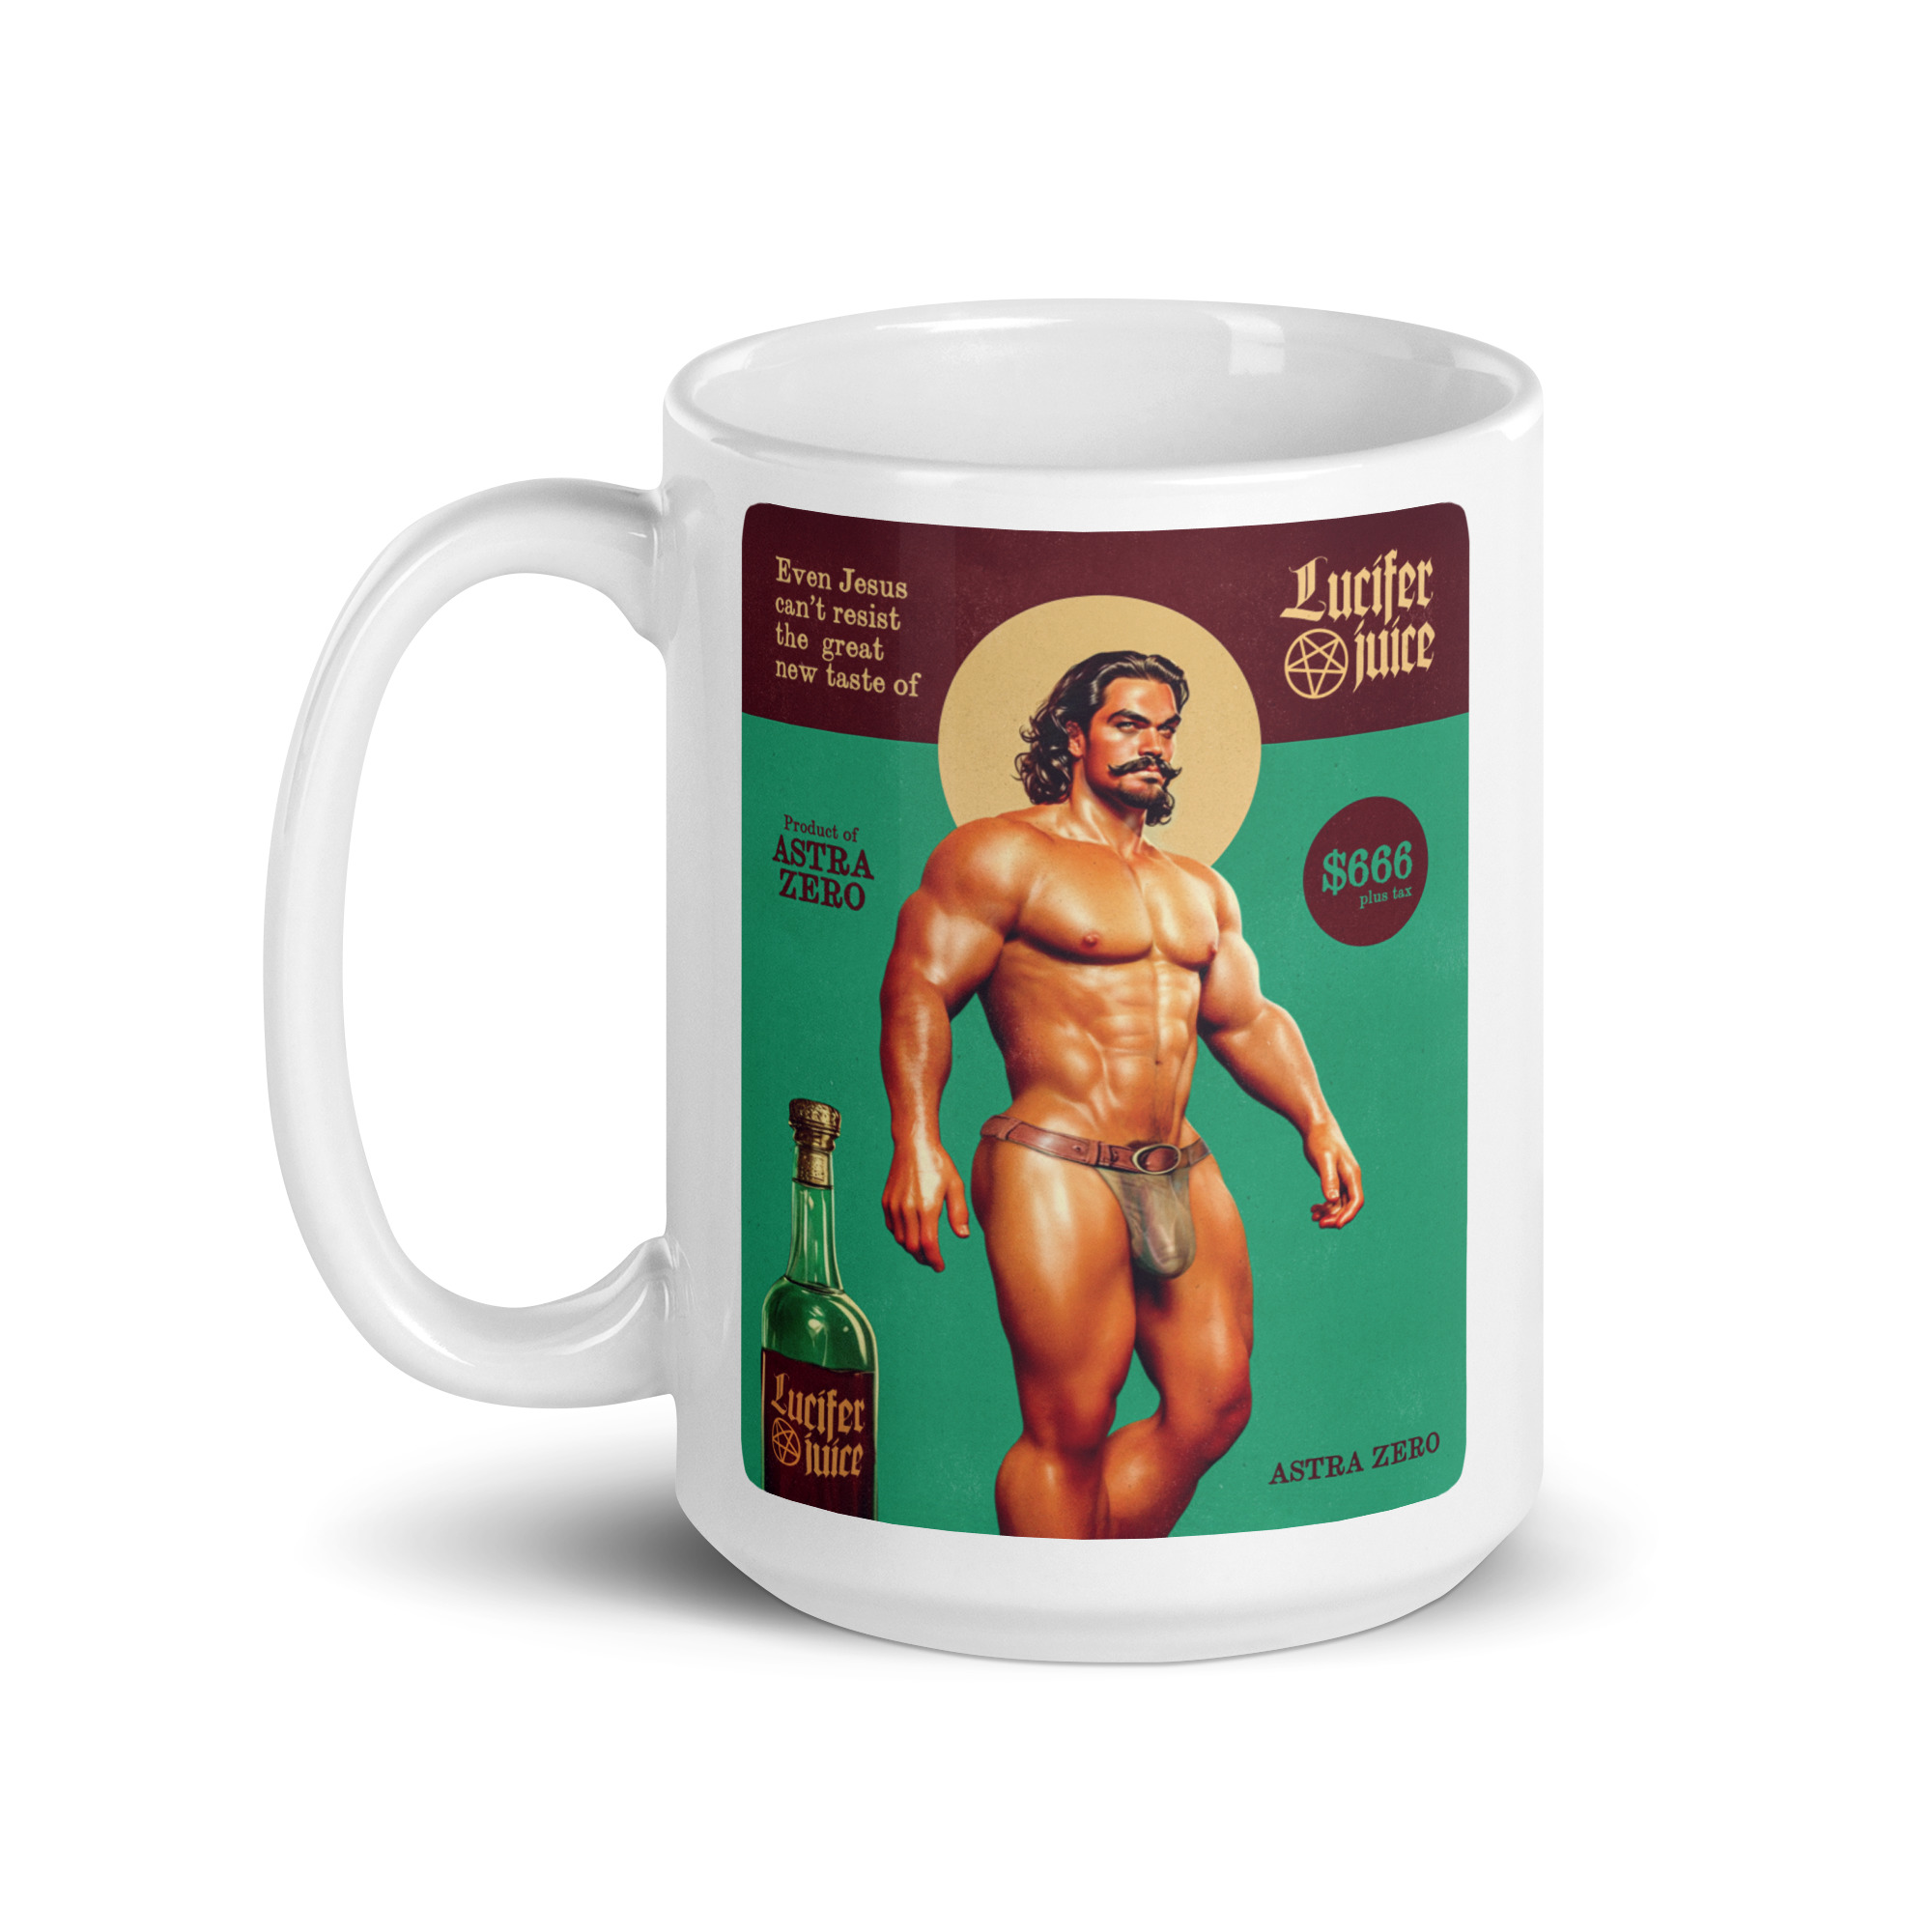 Featured image for “Lucifer Juice - White glossy mug”